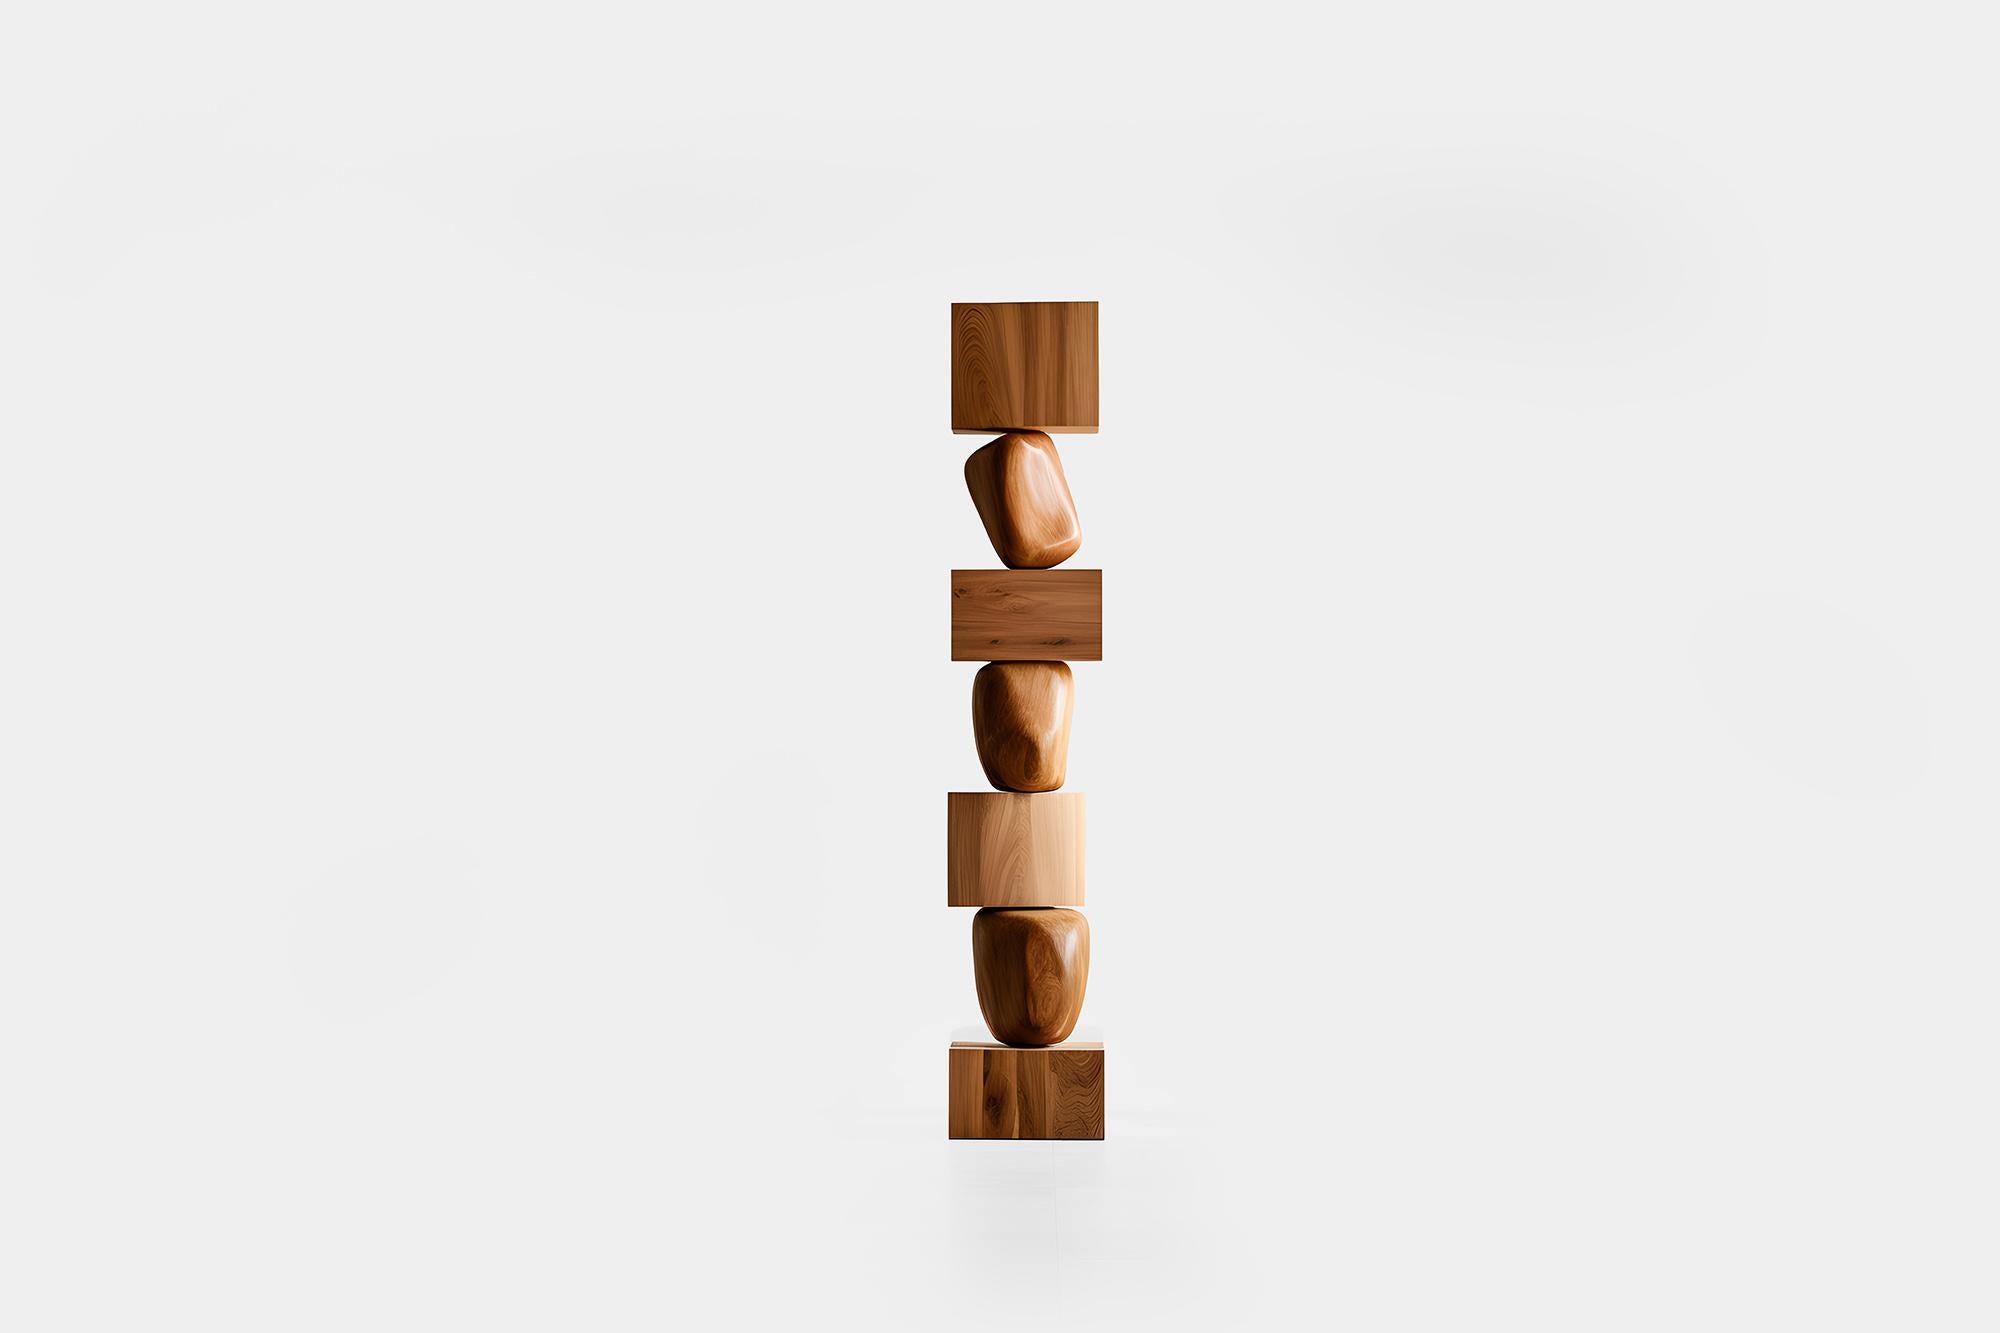 Mexican Still Stand No54: Biomorphic Abstract Oak Totem by NONO, Escalona Crafted For Sale